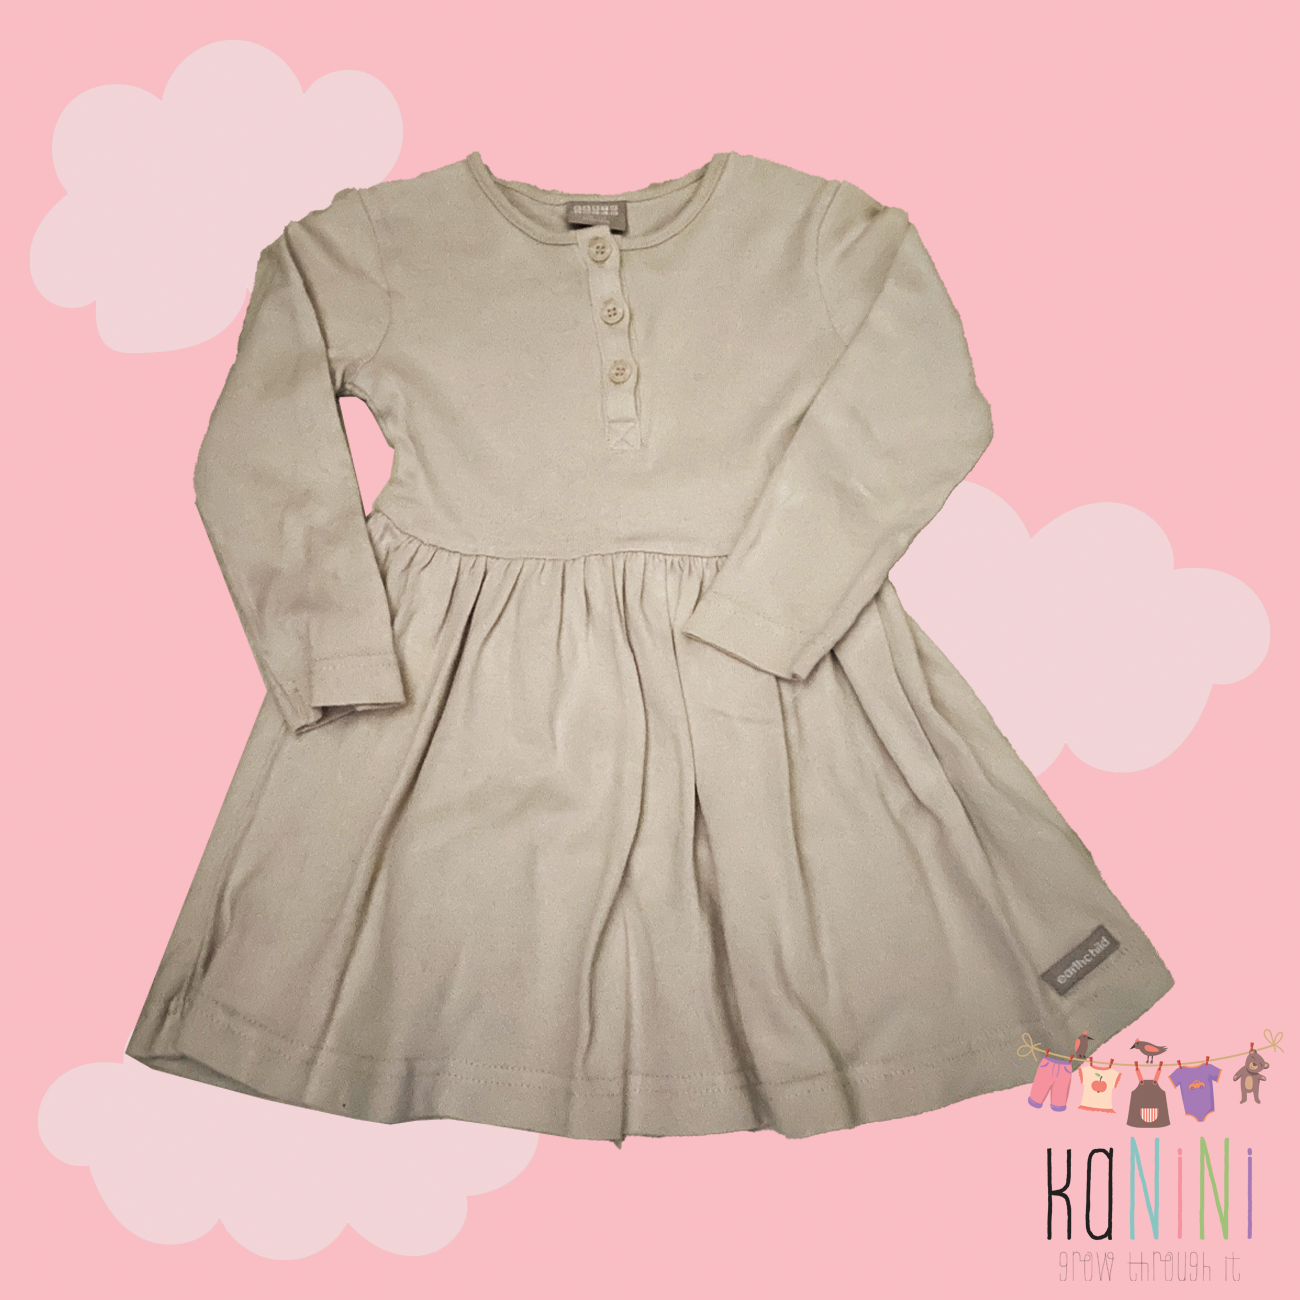 Featured image for “Max & Lulu 2 - 3 Years Girls Grey Dress”